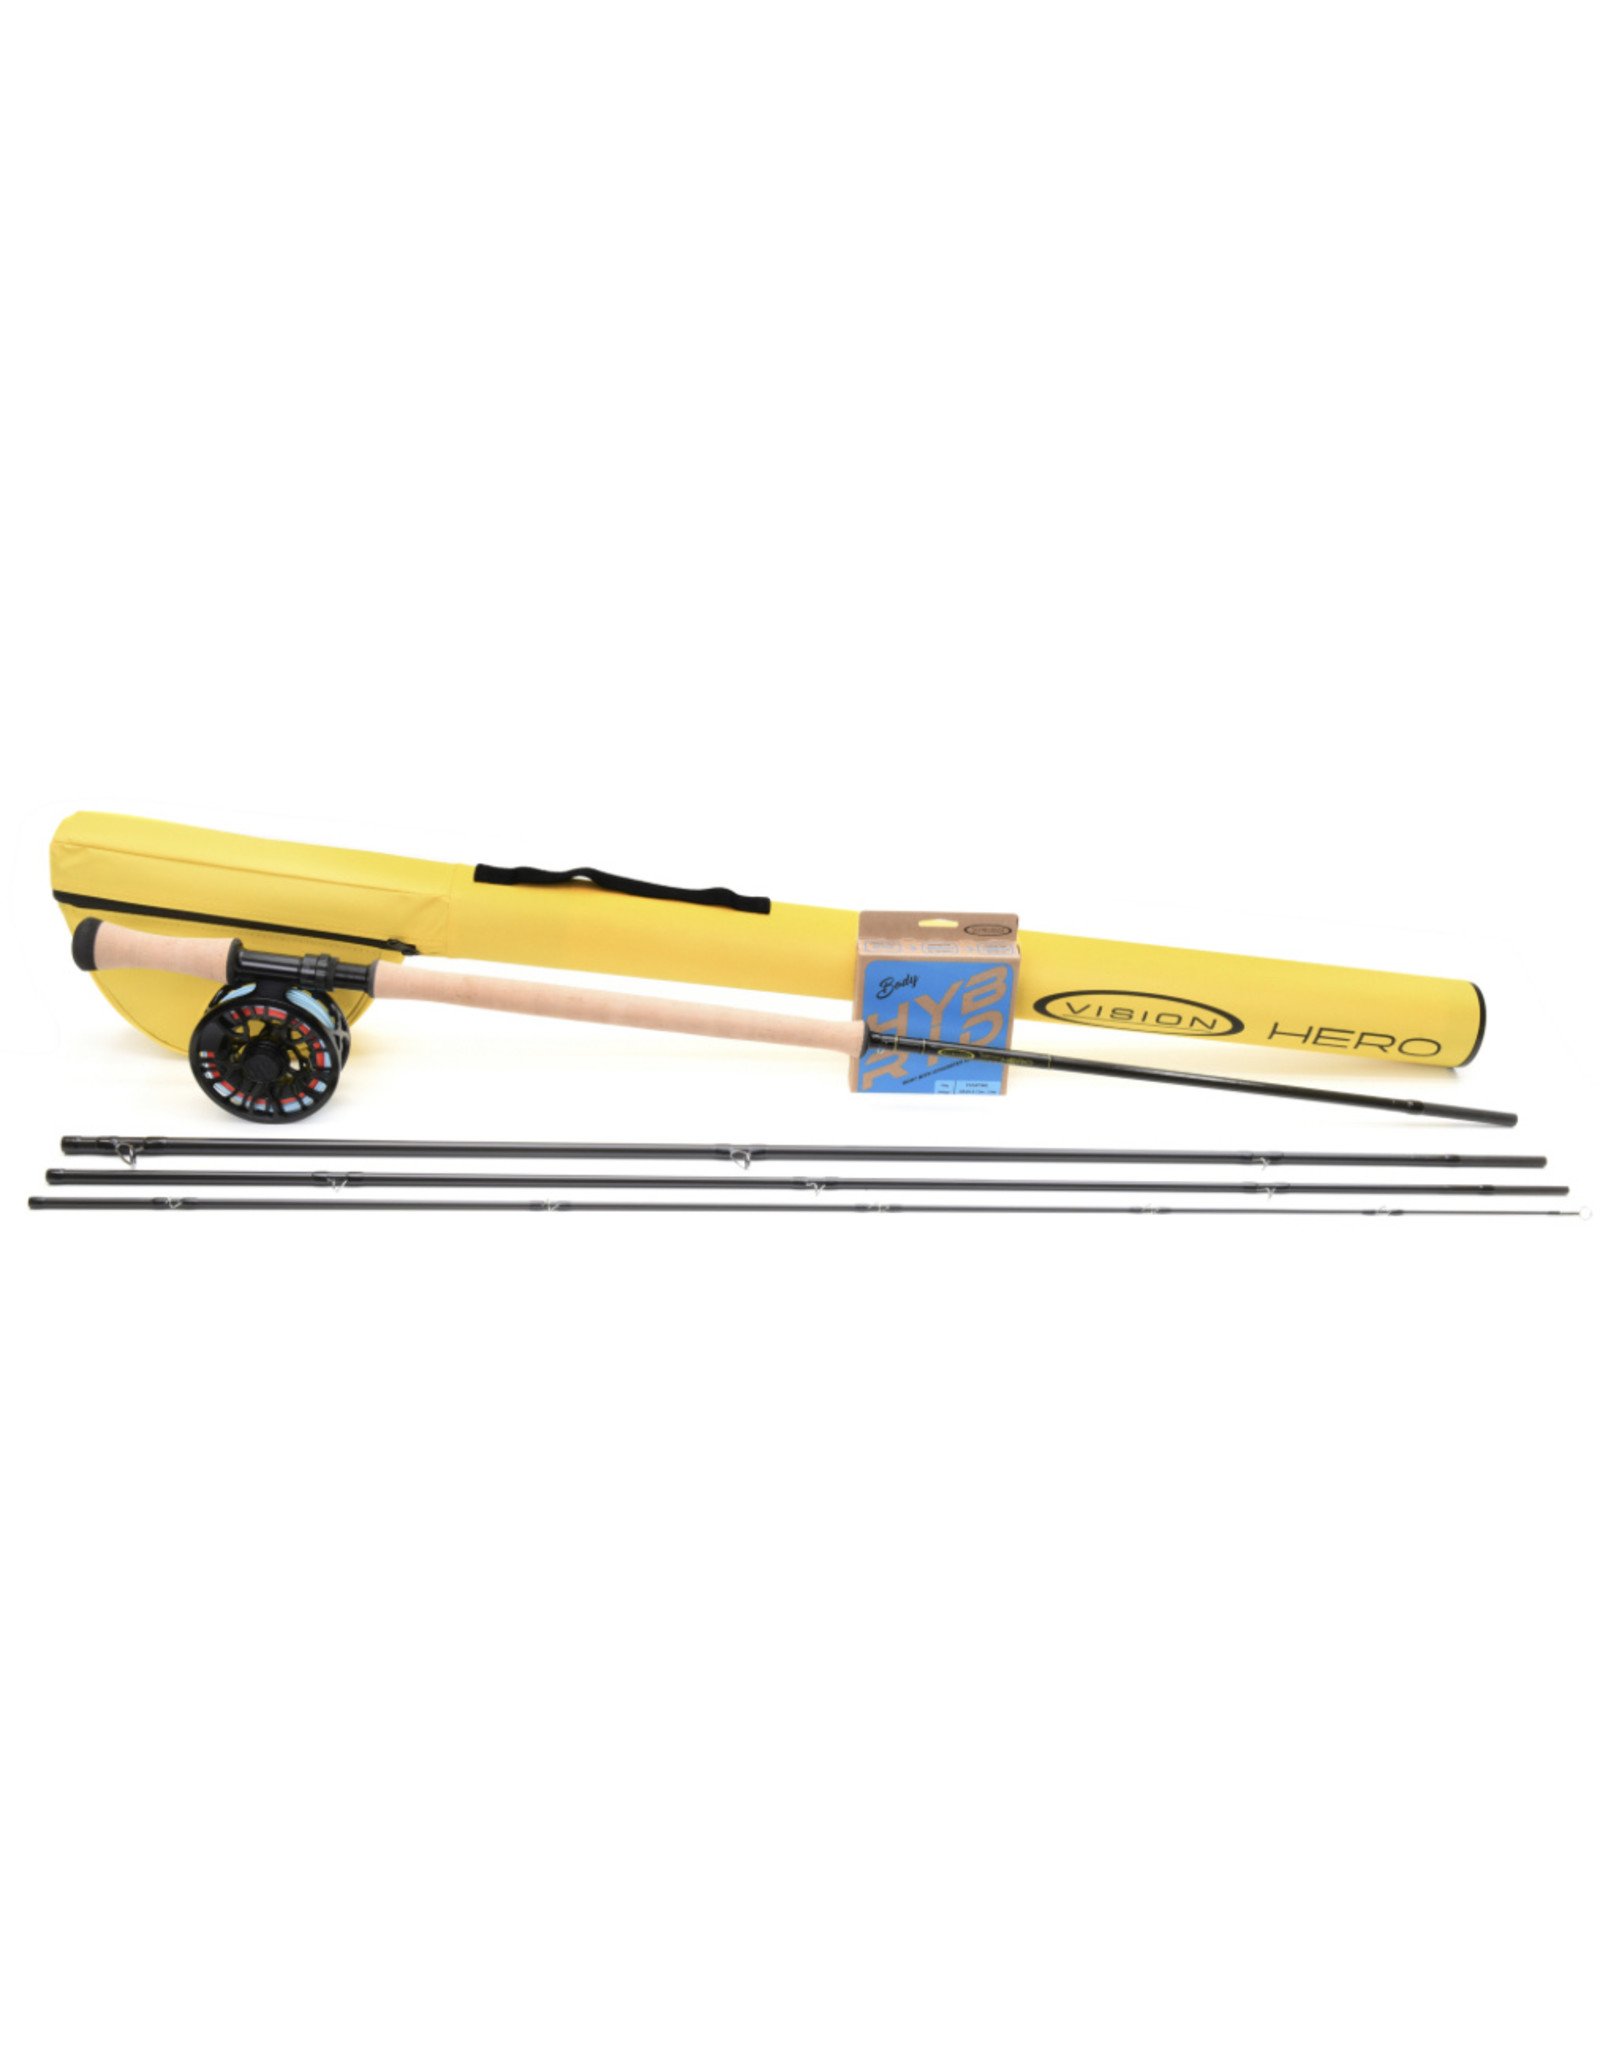 VISION FLY FISHING SALMON HERO OUTFIT 13'7" 8wt